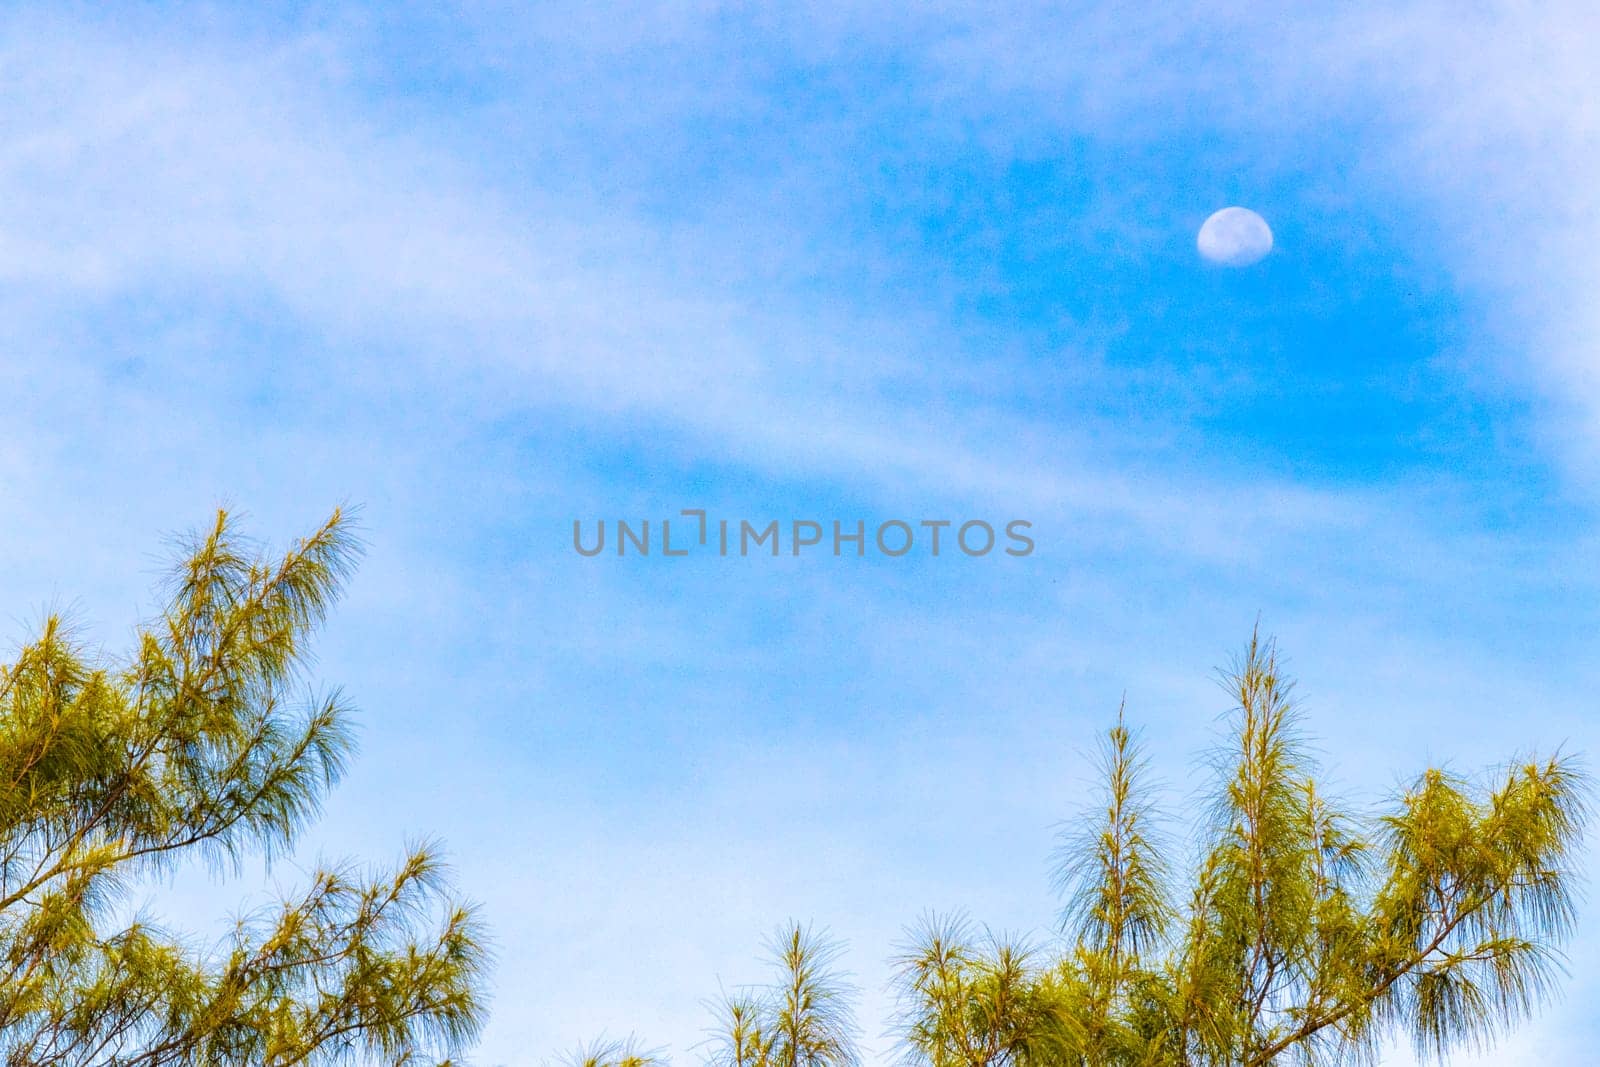 Crescent half full moon in the blue sky during the day with clouds in Playa del Carmen Quintana Roo Mexico.